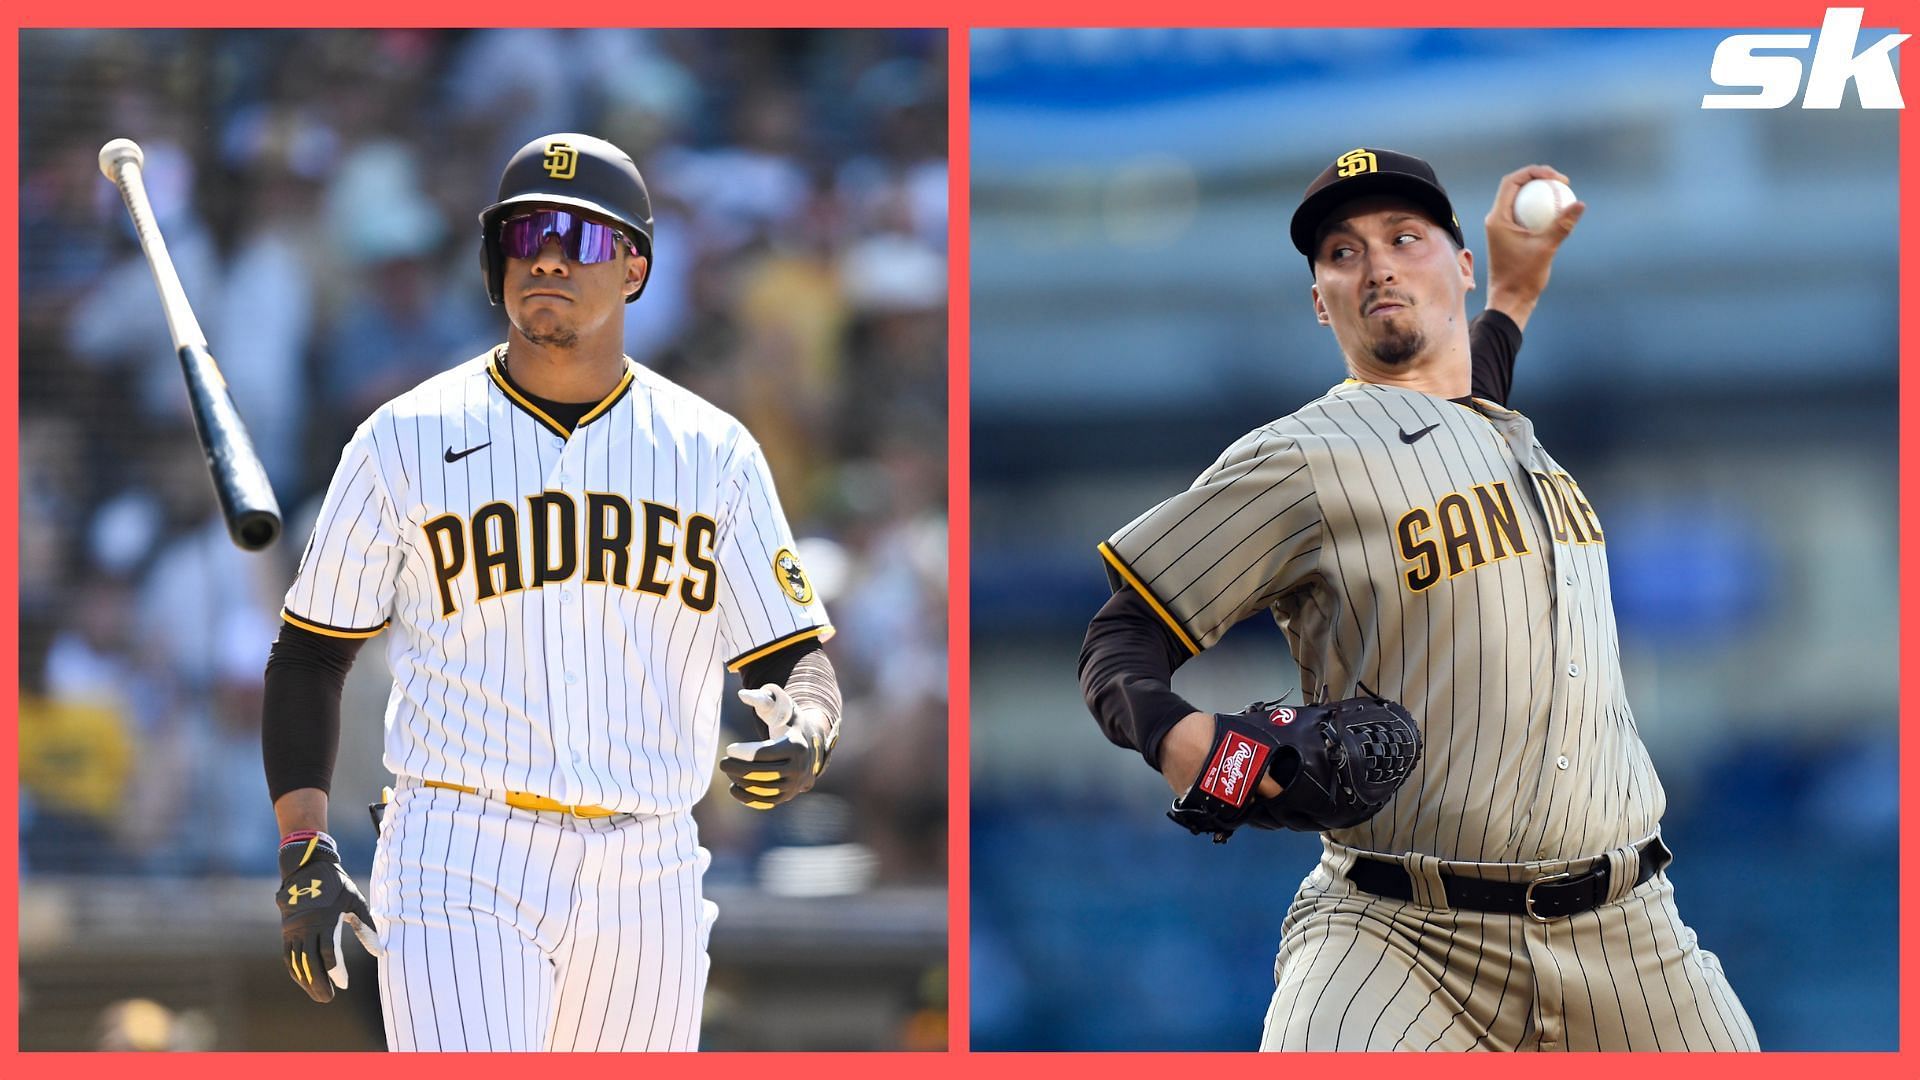 Padres trade deadline candidates: Juan Soto, Blake Snell, Josh Hader and  Trent Grisham could be moved before August 1st deadline